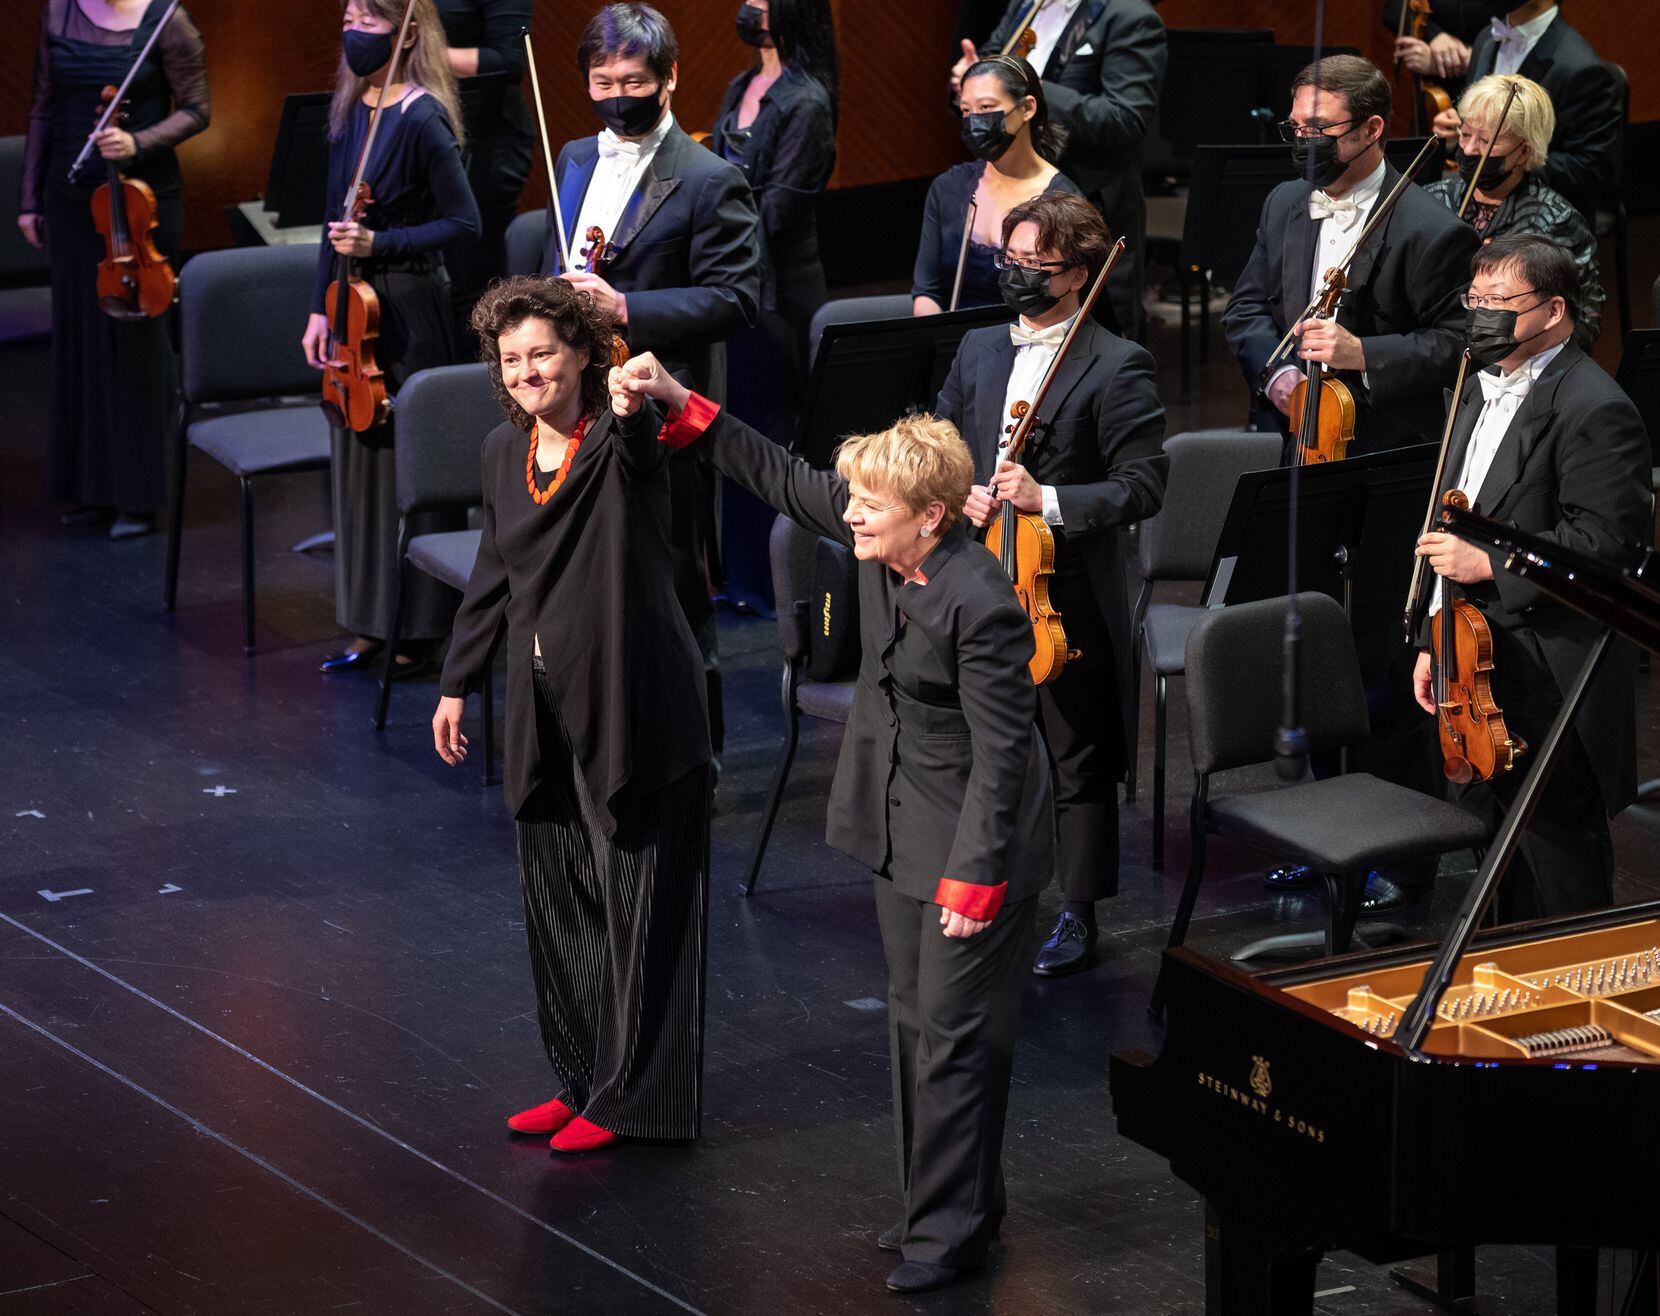 Anna Geniushene, 31, of Russia, with conductor Marin Alsop, right, stand for an applause...